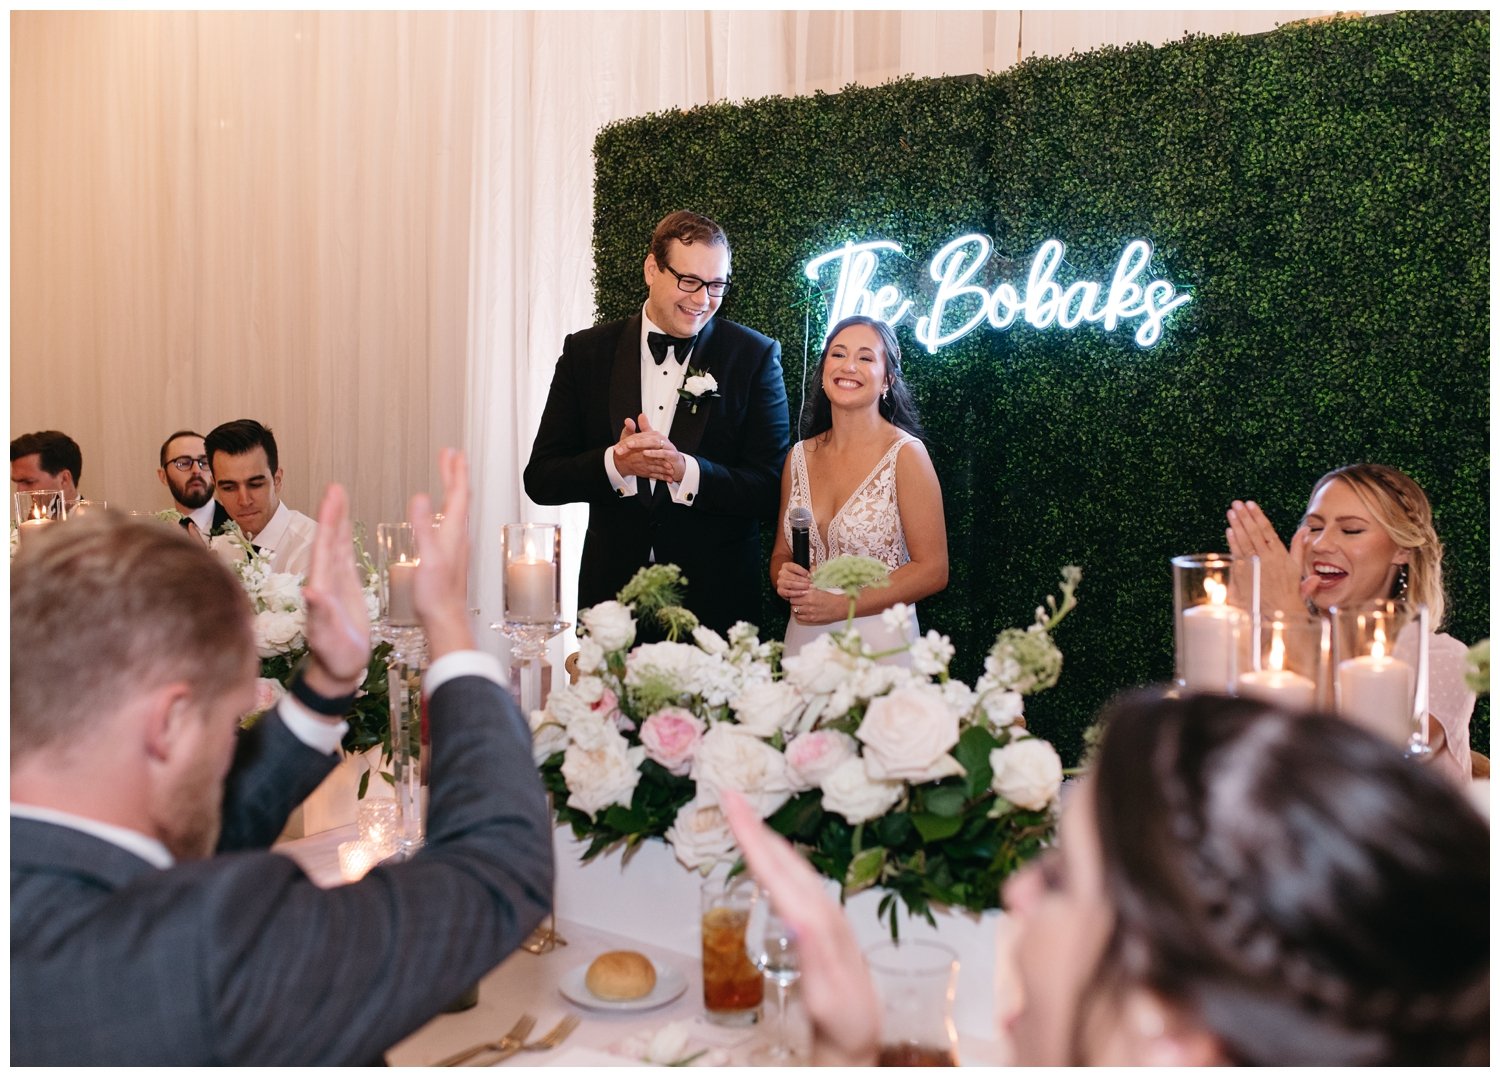 Guests toast a couple during a small wedding reception